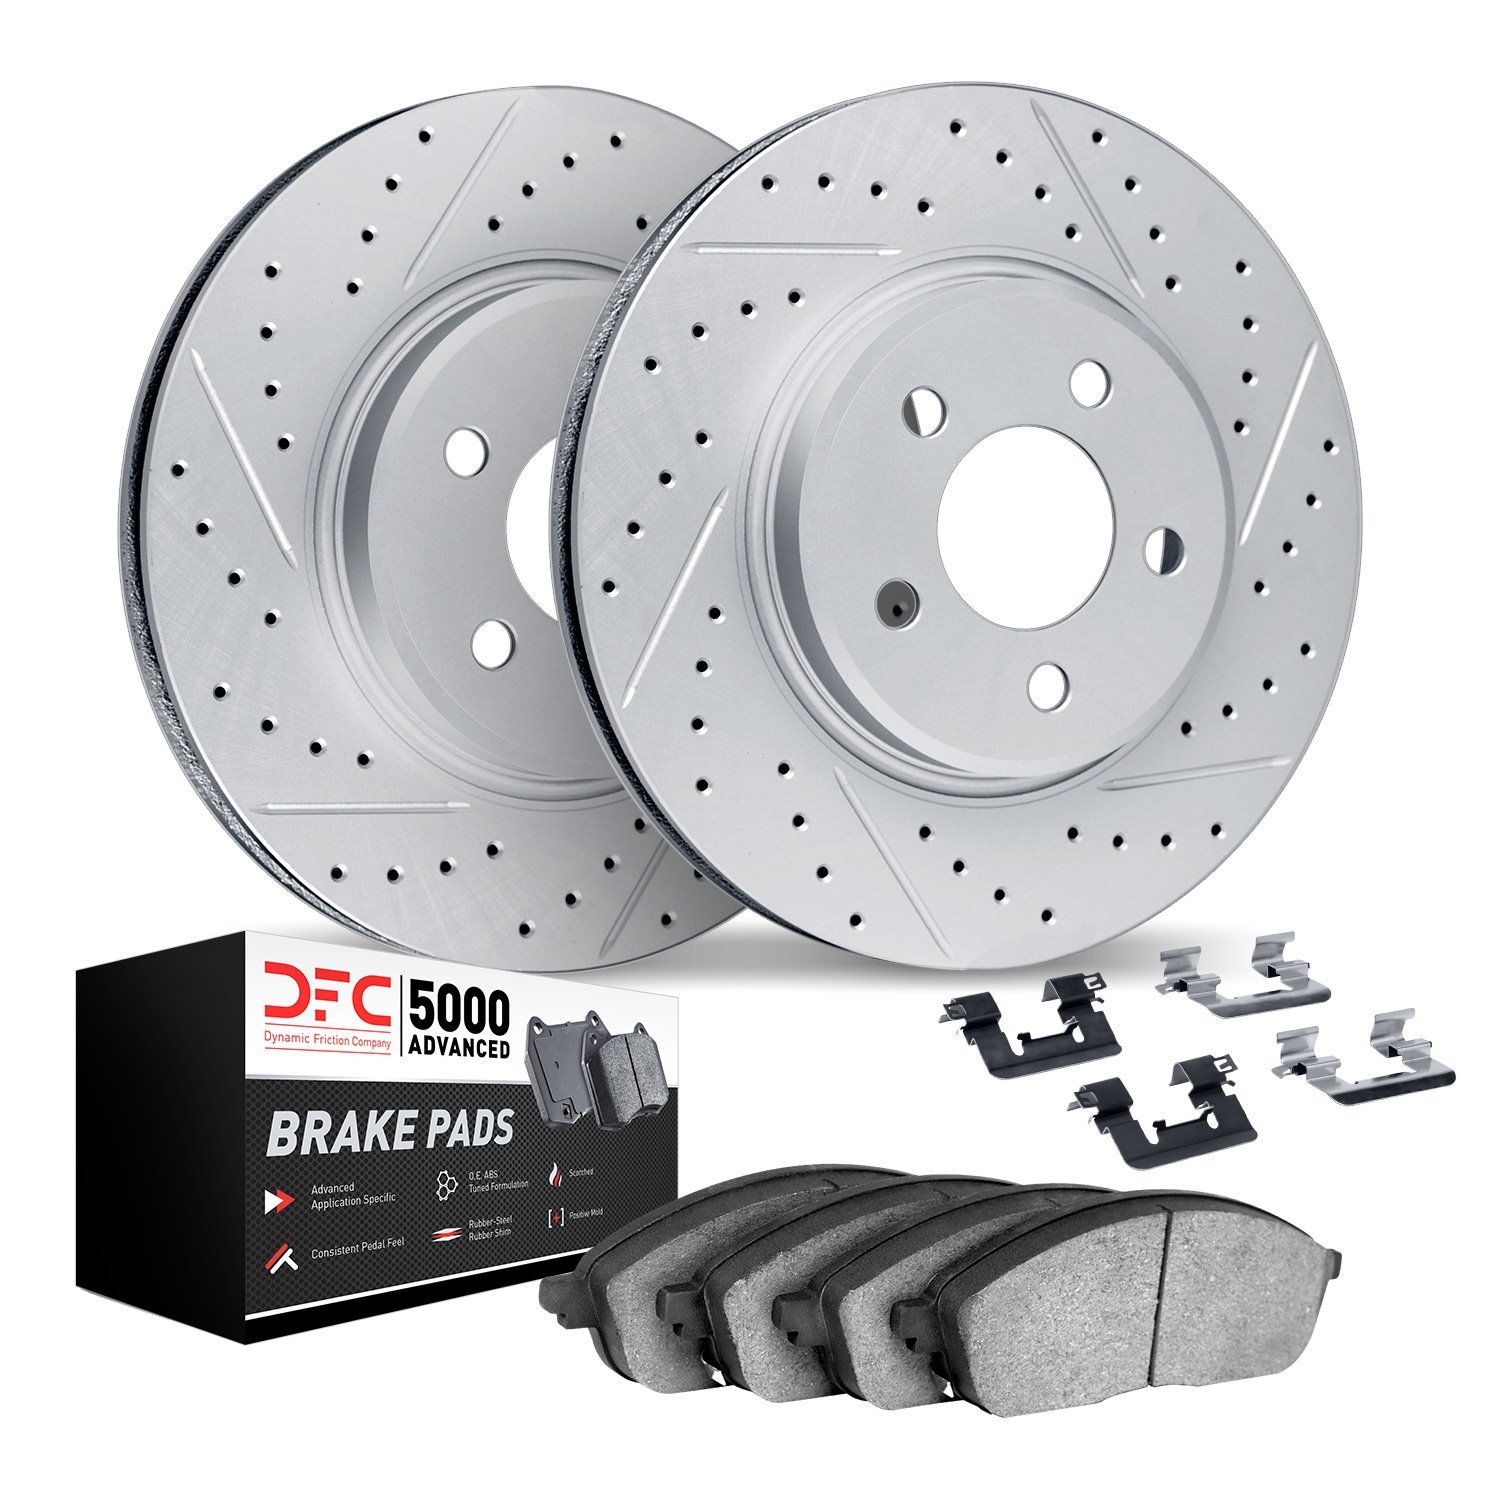 2512-55005 Geoperformance Drilled/Slotted Rotors w/5000 Advanced Brake Pads Kit & Hardware, Fits Select Ford/Lincoln/Mercury/Maz